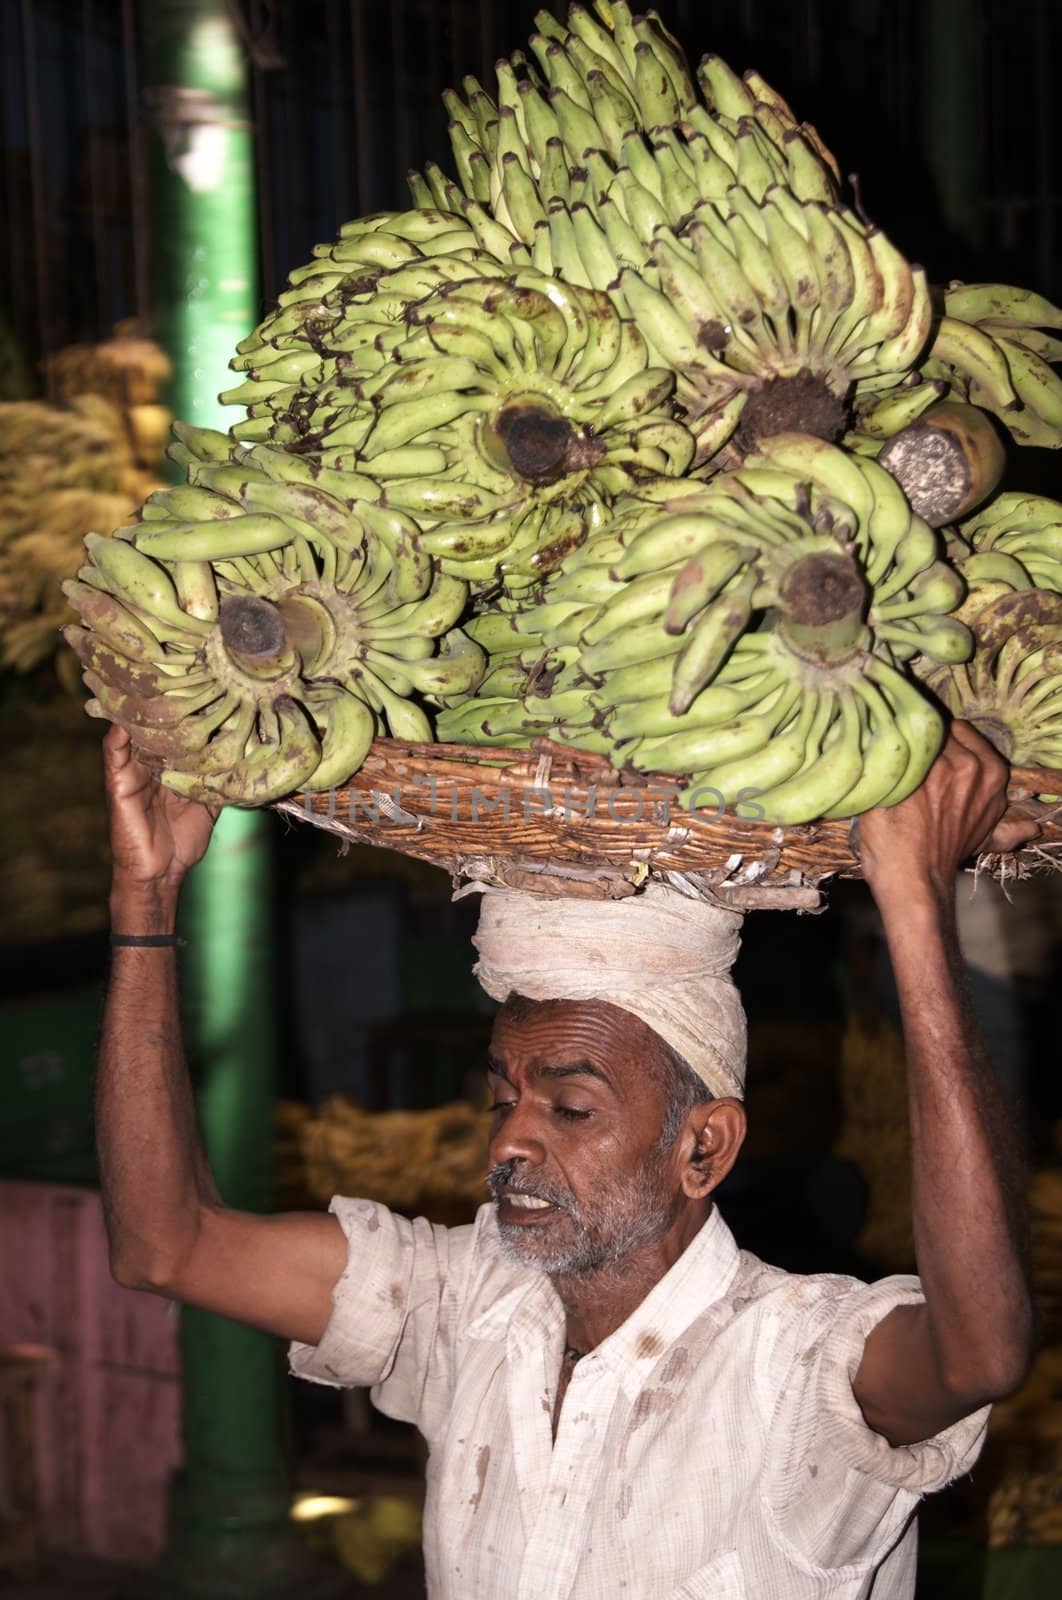 Man carrying large bunch of green bananas on his head in the market at Mysore, Southern India